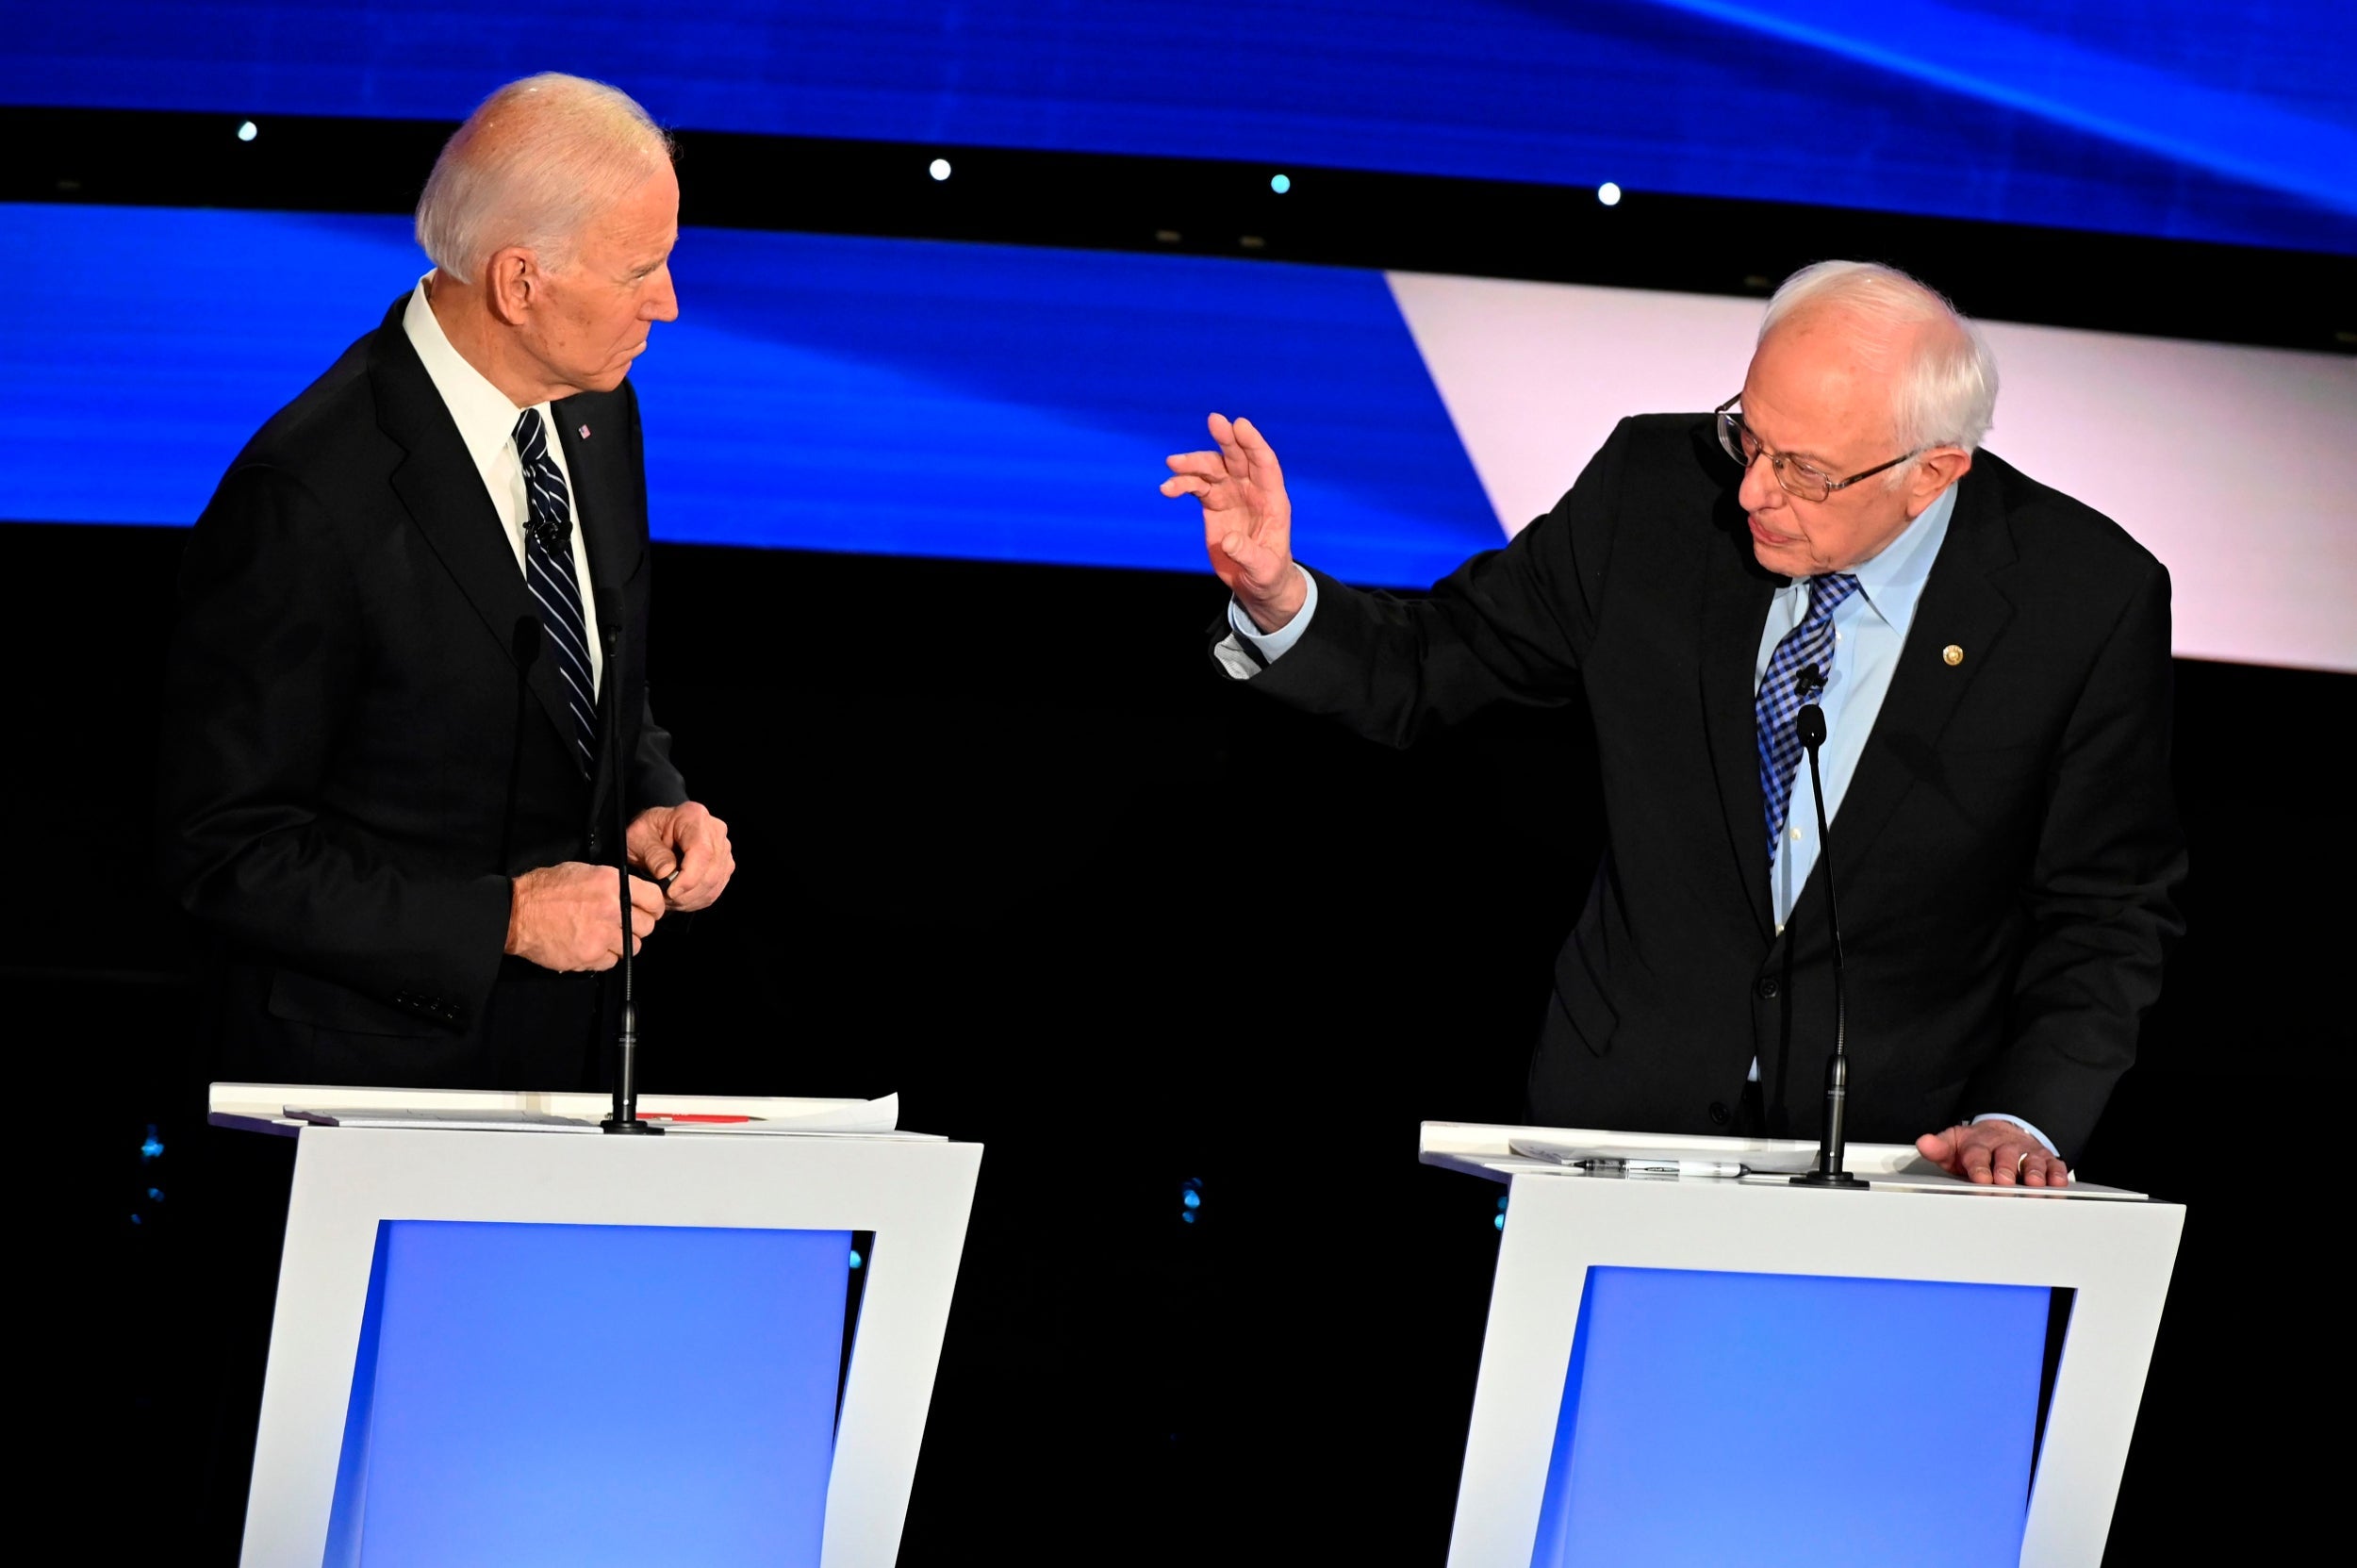 Bernie Sanders surged ahead of Joe Biden in a new CNN poll asking voters for their pick for the Democratic nomination.